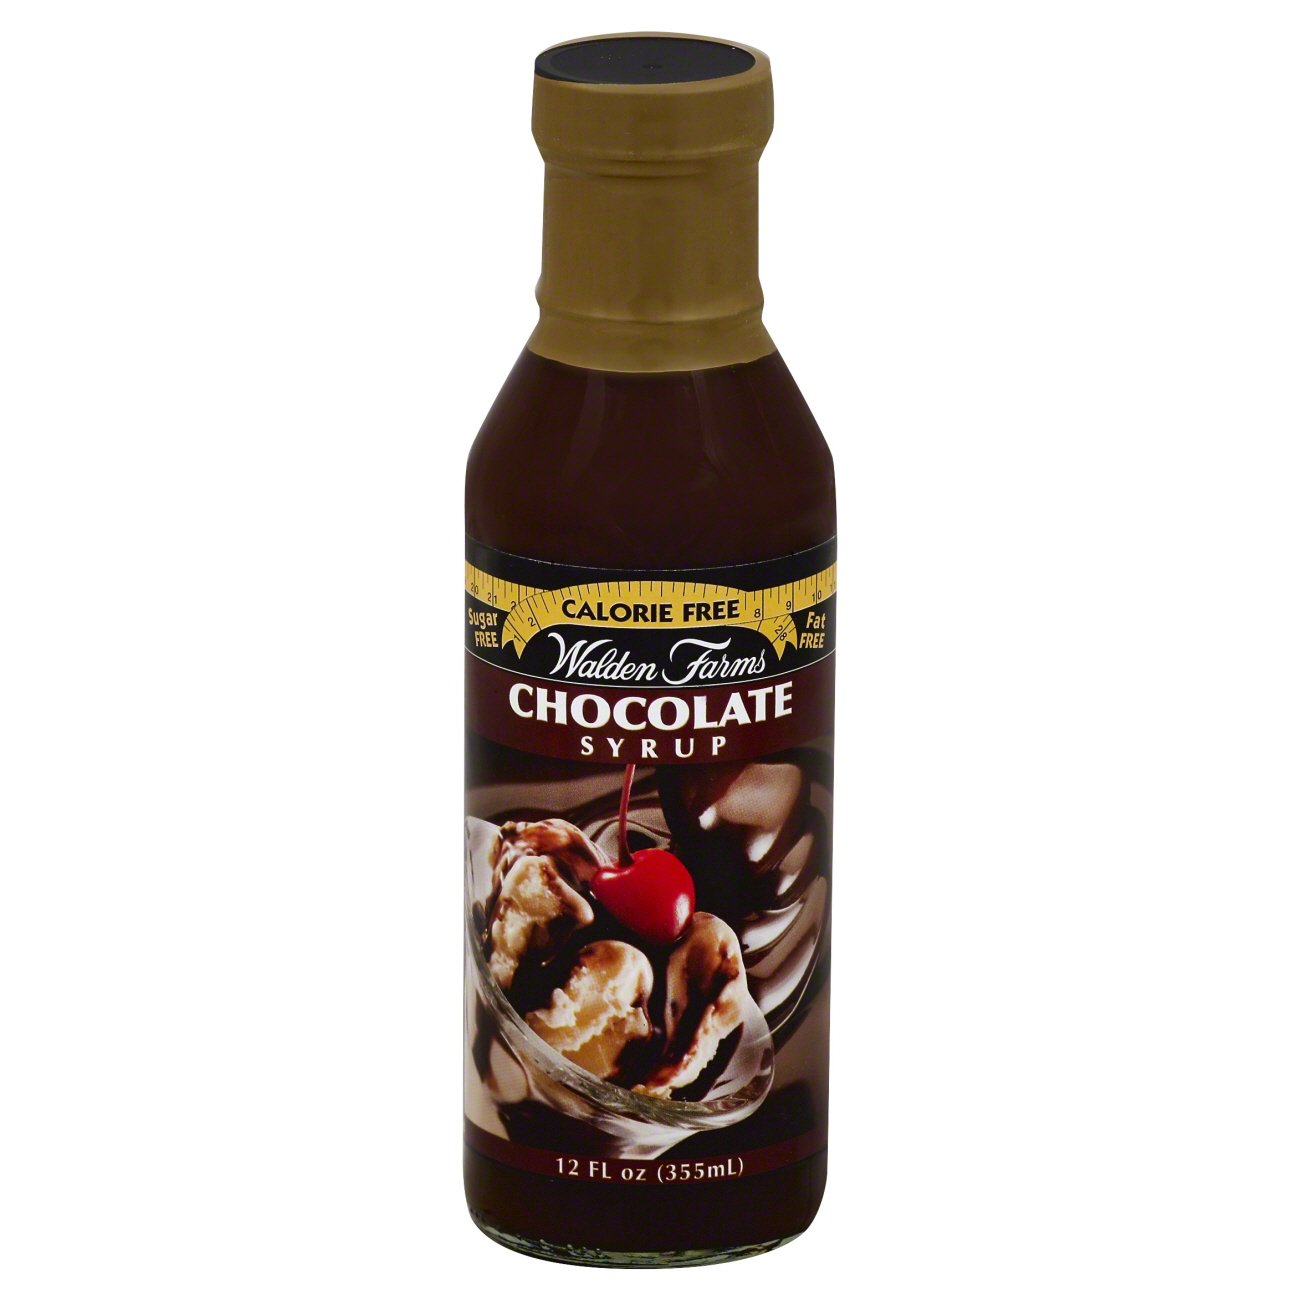 Walden Farms Chocolate Syrup - Shop Sundae Toppings at H-E-B